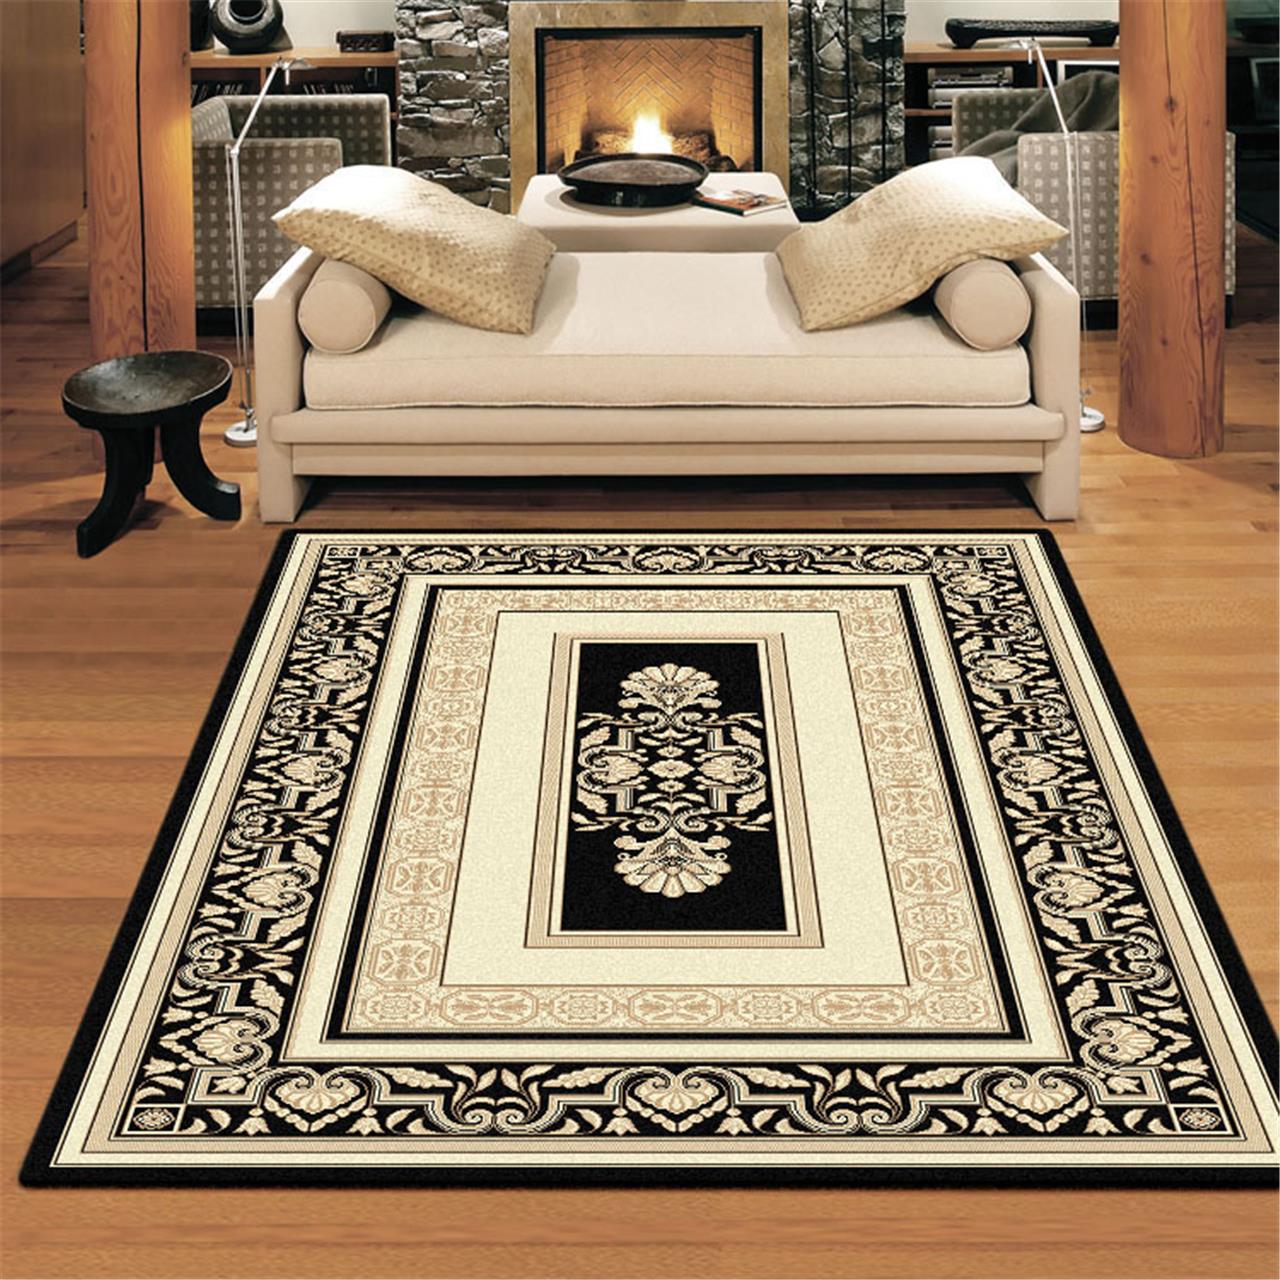 We have Australia's largest floor rugs range all available for purchase online at rock bottom prices! ... Shop for your Rugs Online, from anywhere in Australia.